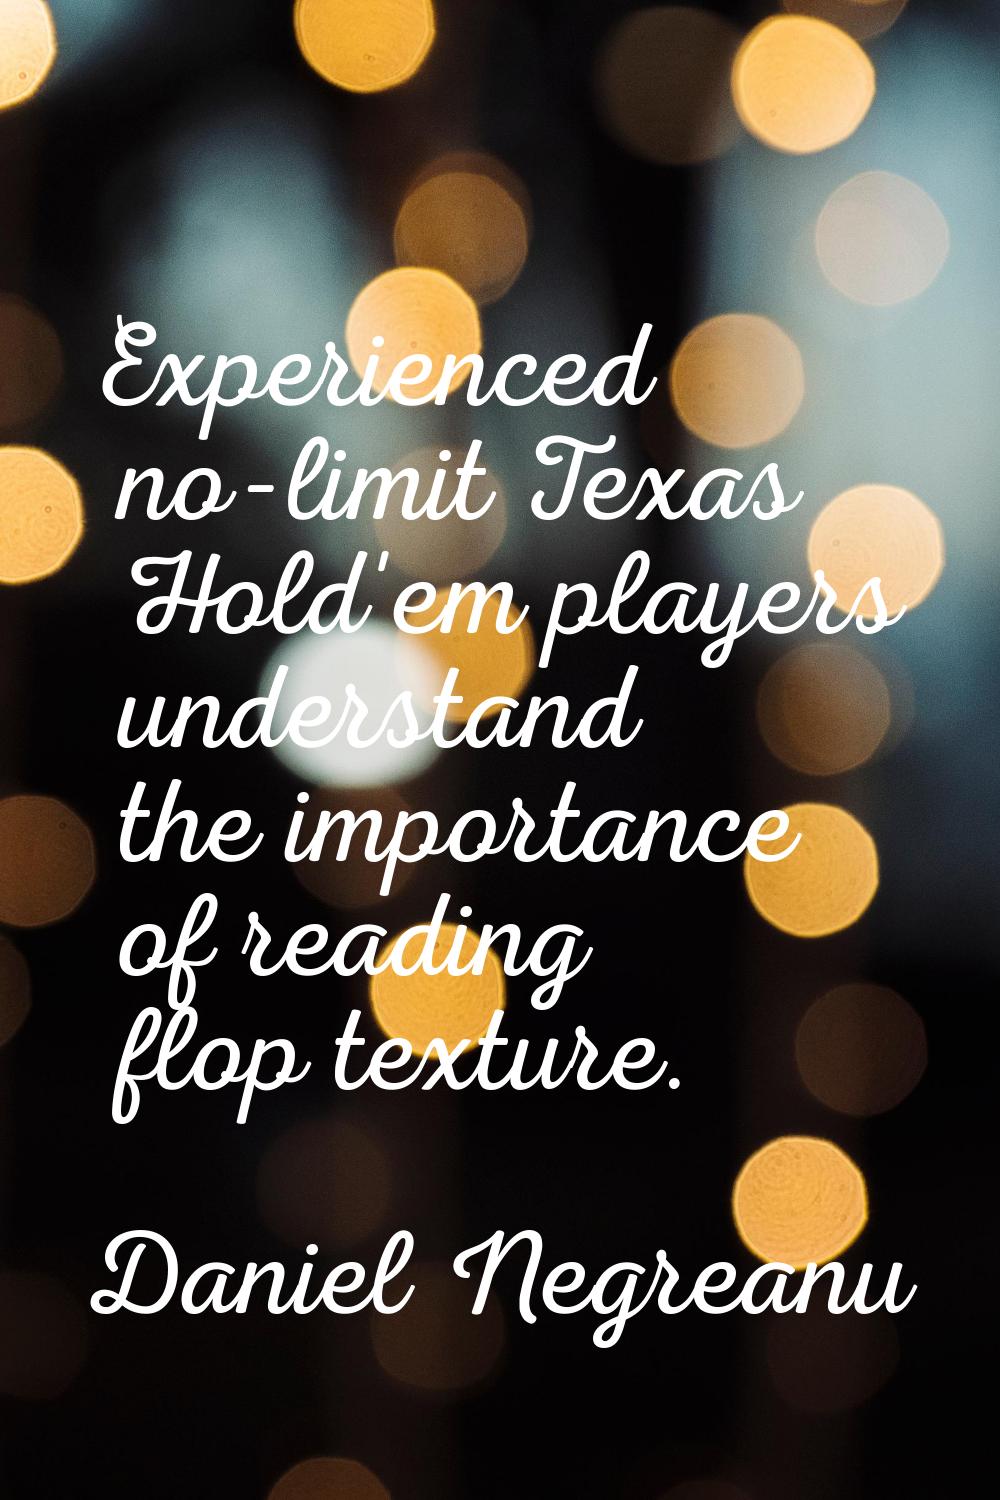 Experienced no-limit Texas Hold'em players understand the importance of reading flop texture.